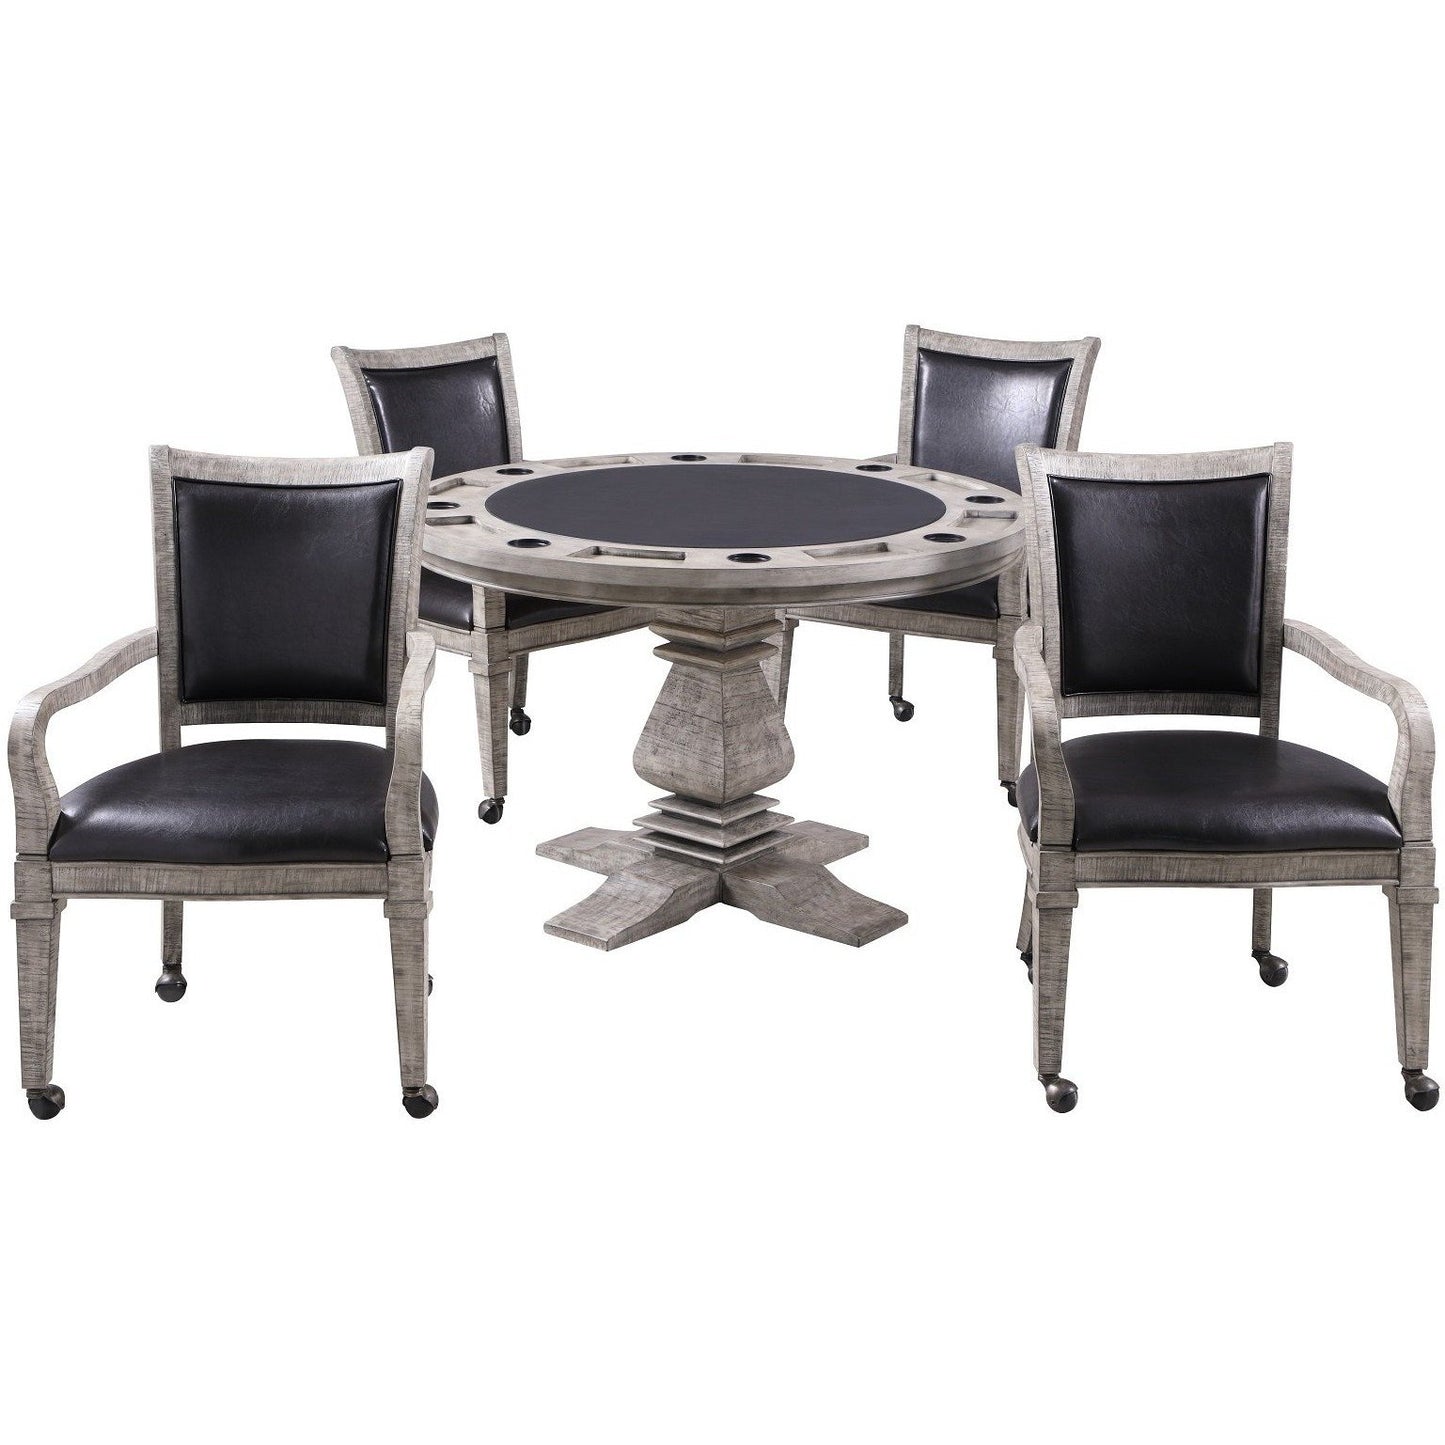 Hathaway Montecito Driftwood Round Poker Table with 4 Arm Chairs - Gaming Blaze